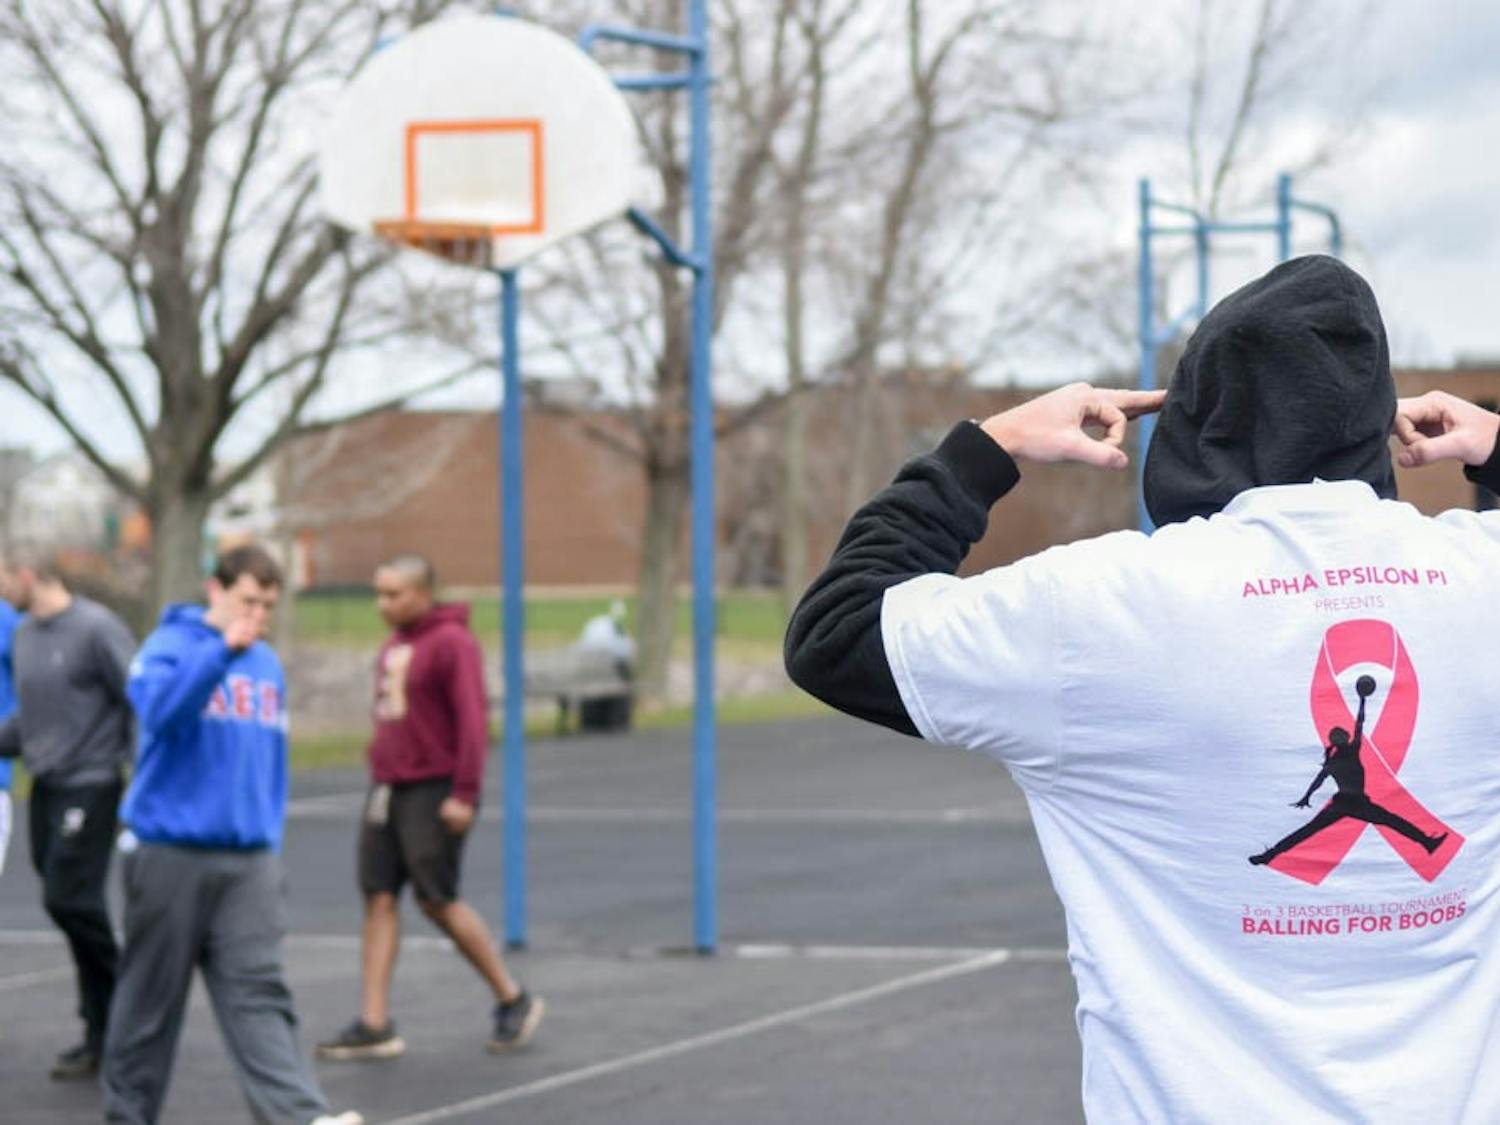 Alpha Epsilon Pi hosted its fifth annual Balling for Boobs three-on-three charity basketball tournament on April 2. The event raised $800, triple the amount projected for this year.